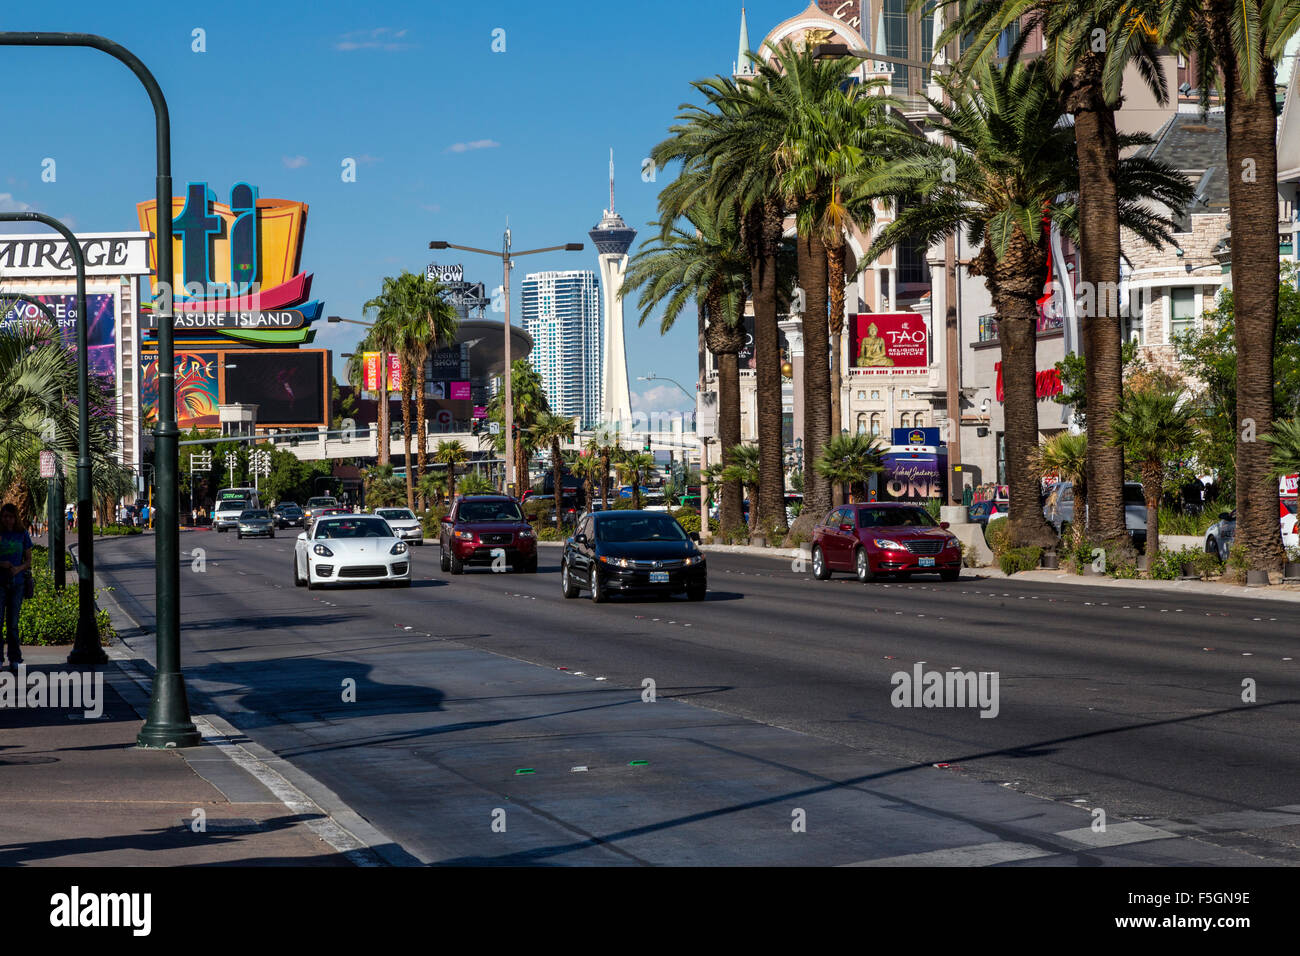 Las Vegas, Nevada.  Las Vegas Boulevard, The Strip, with Stratosphere Casino, Hotel, and Tower in background. Stock Photo